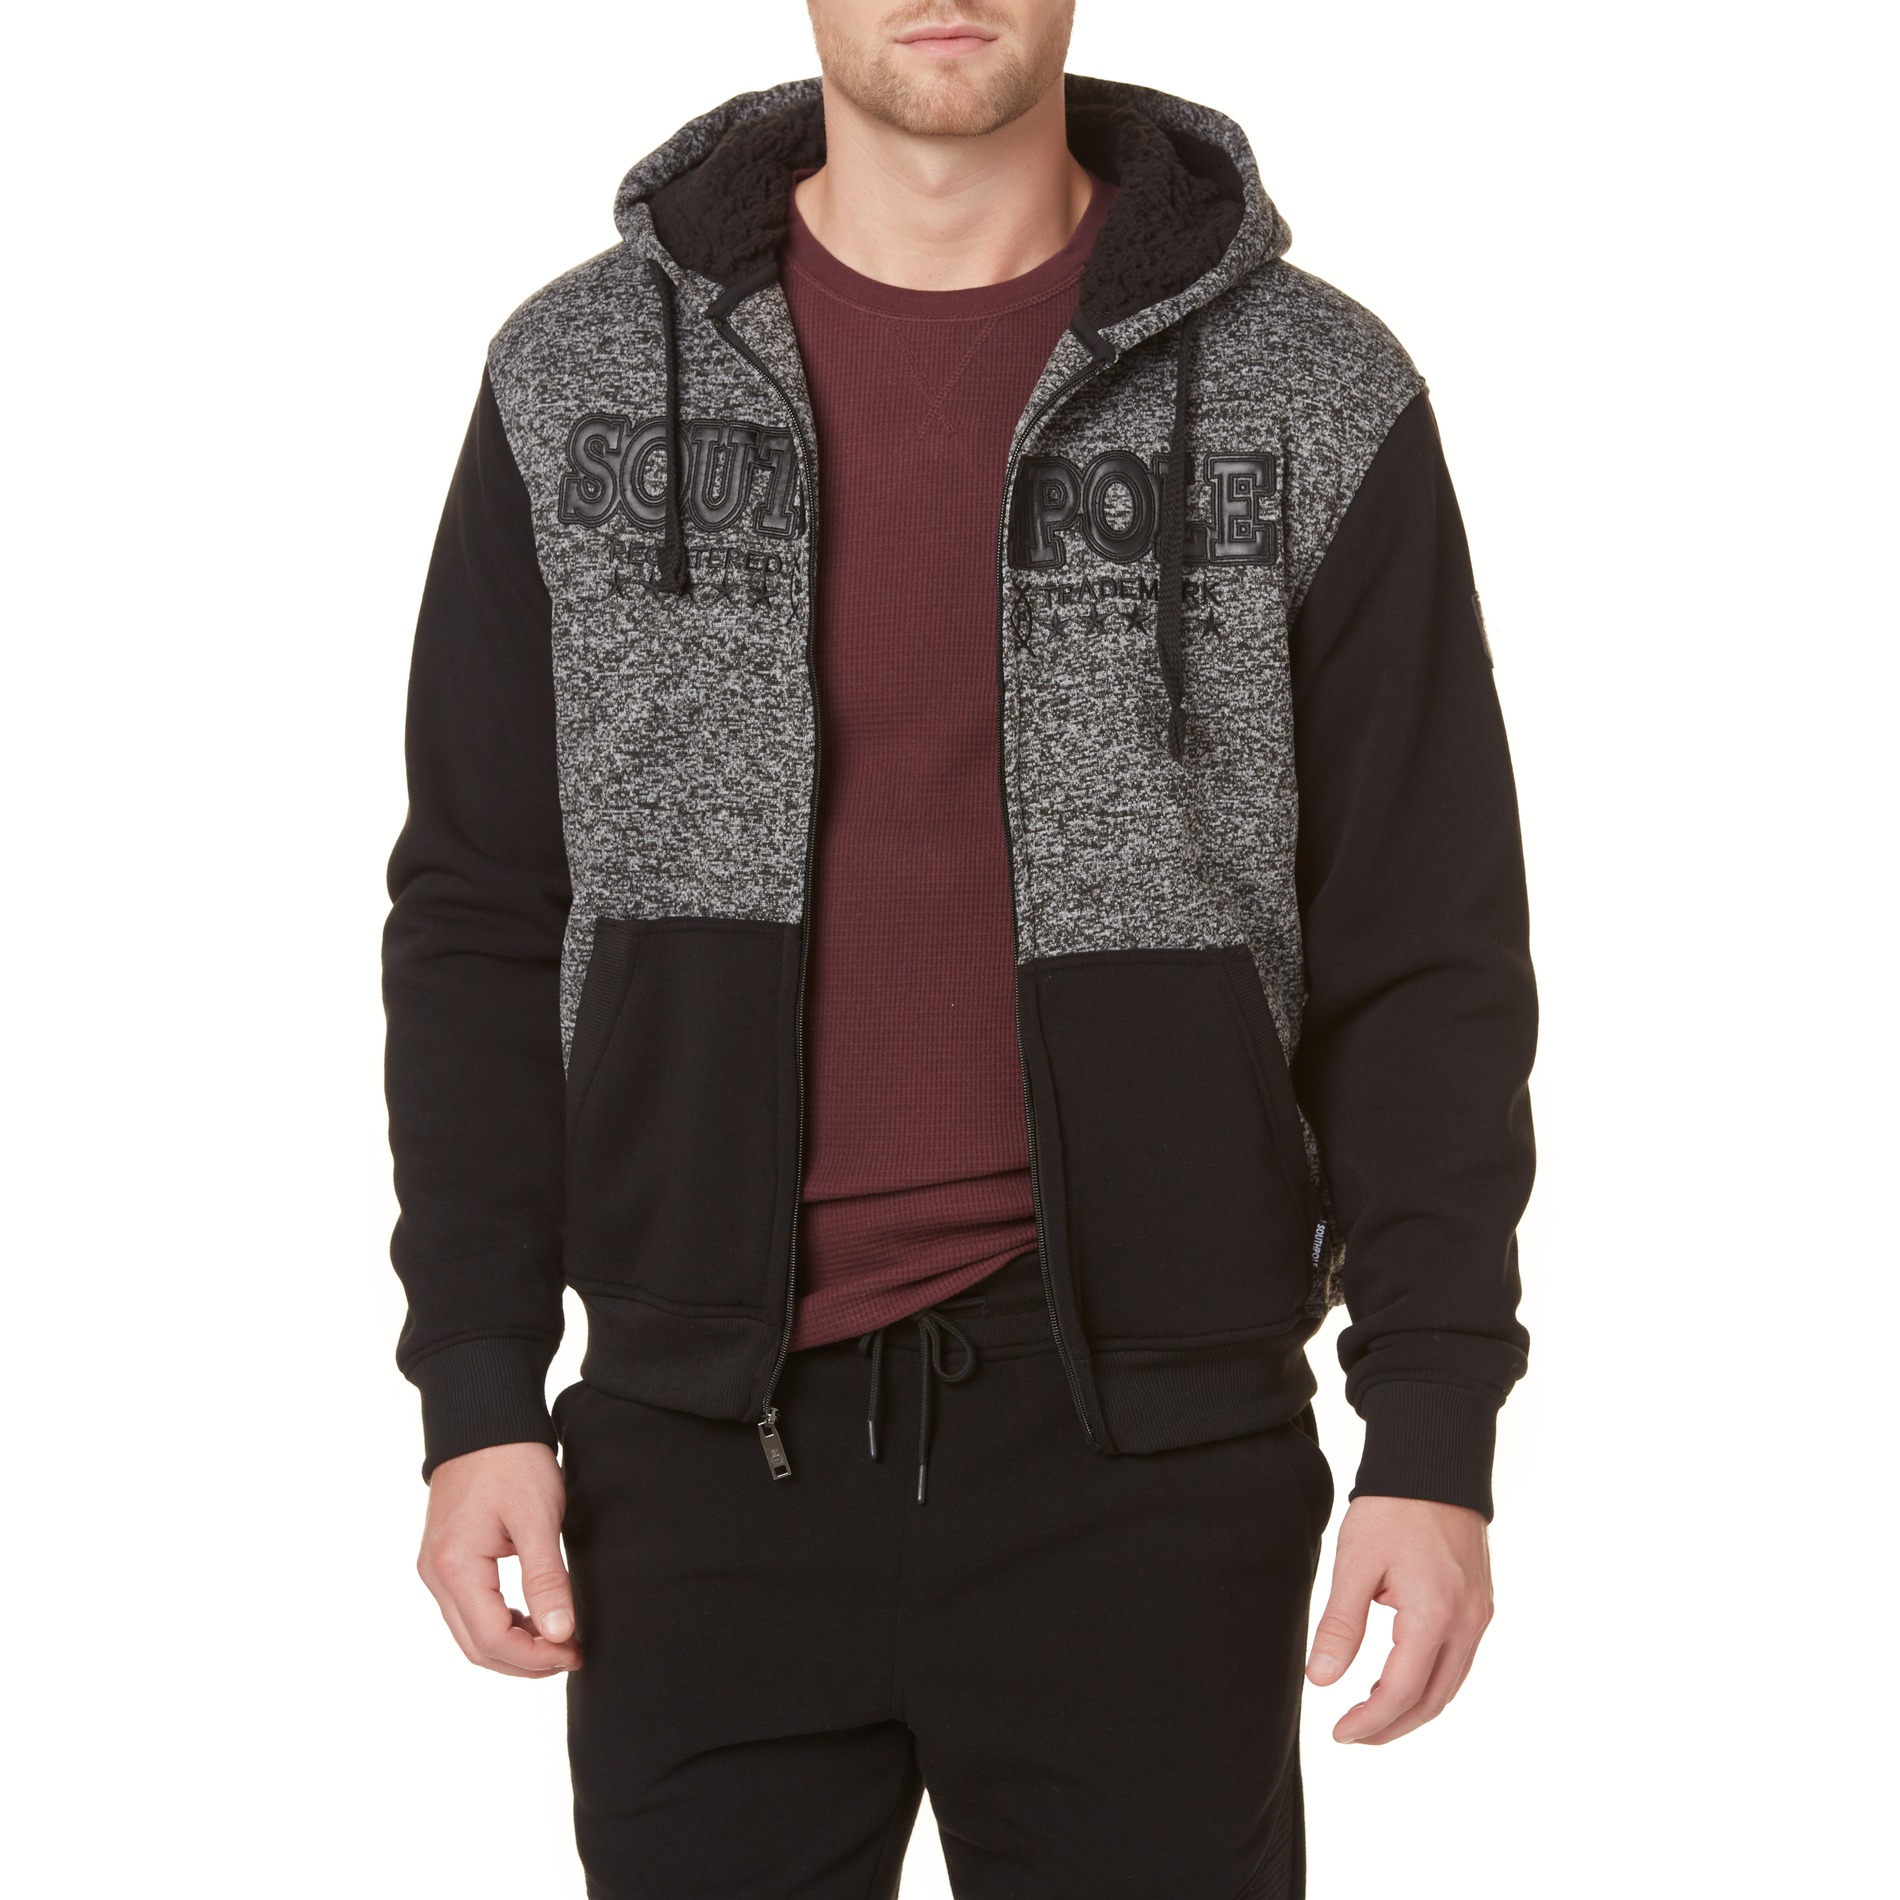 Southpole Young Men's Hoodie Jacket - Marled